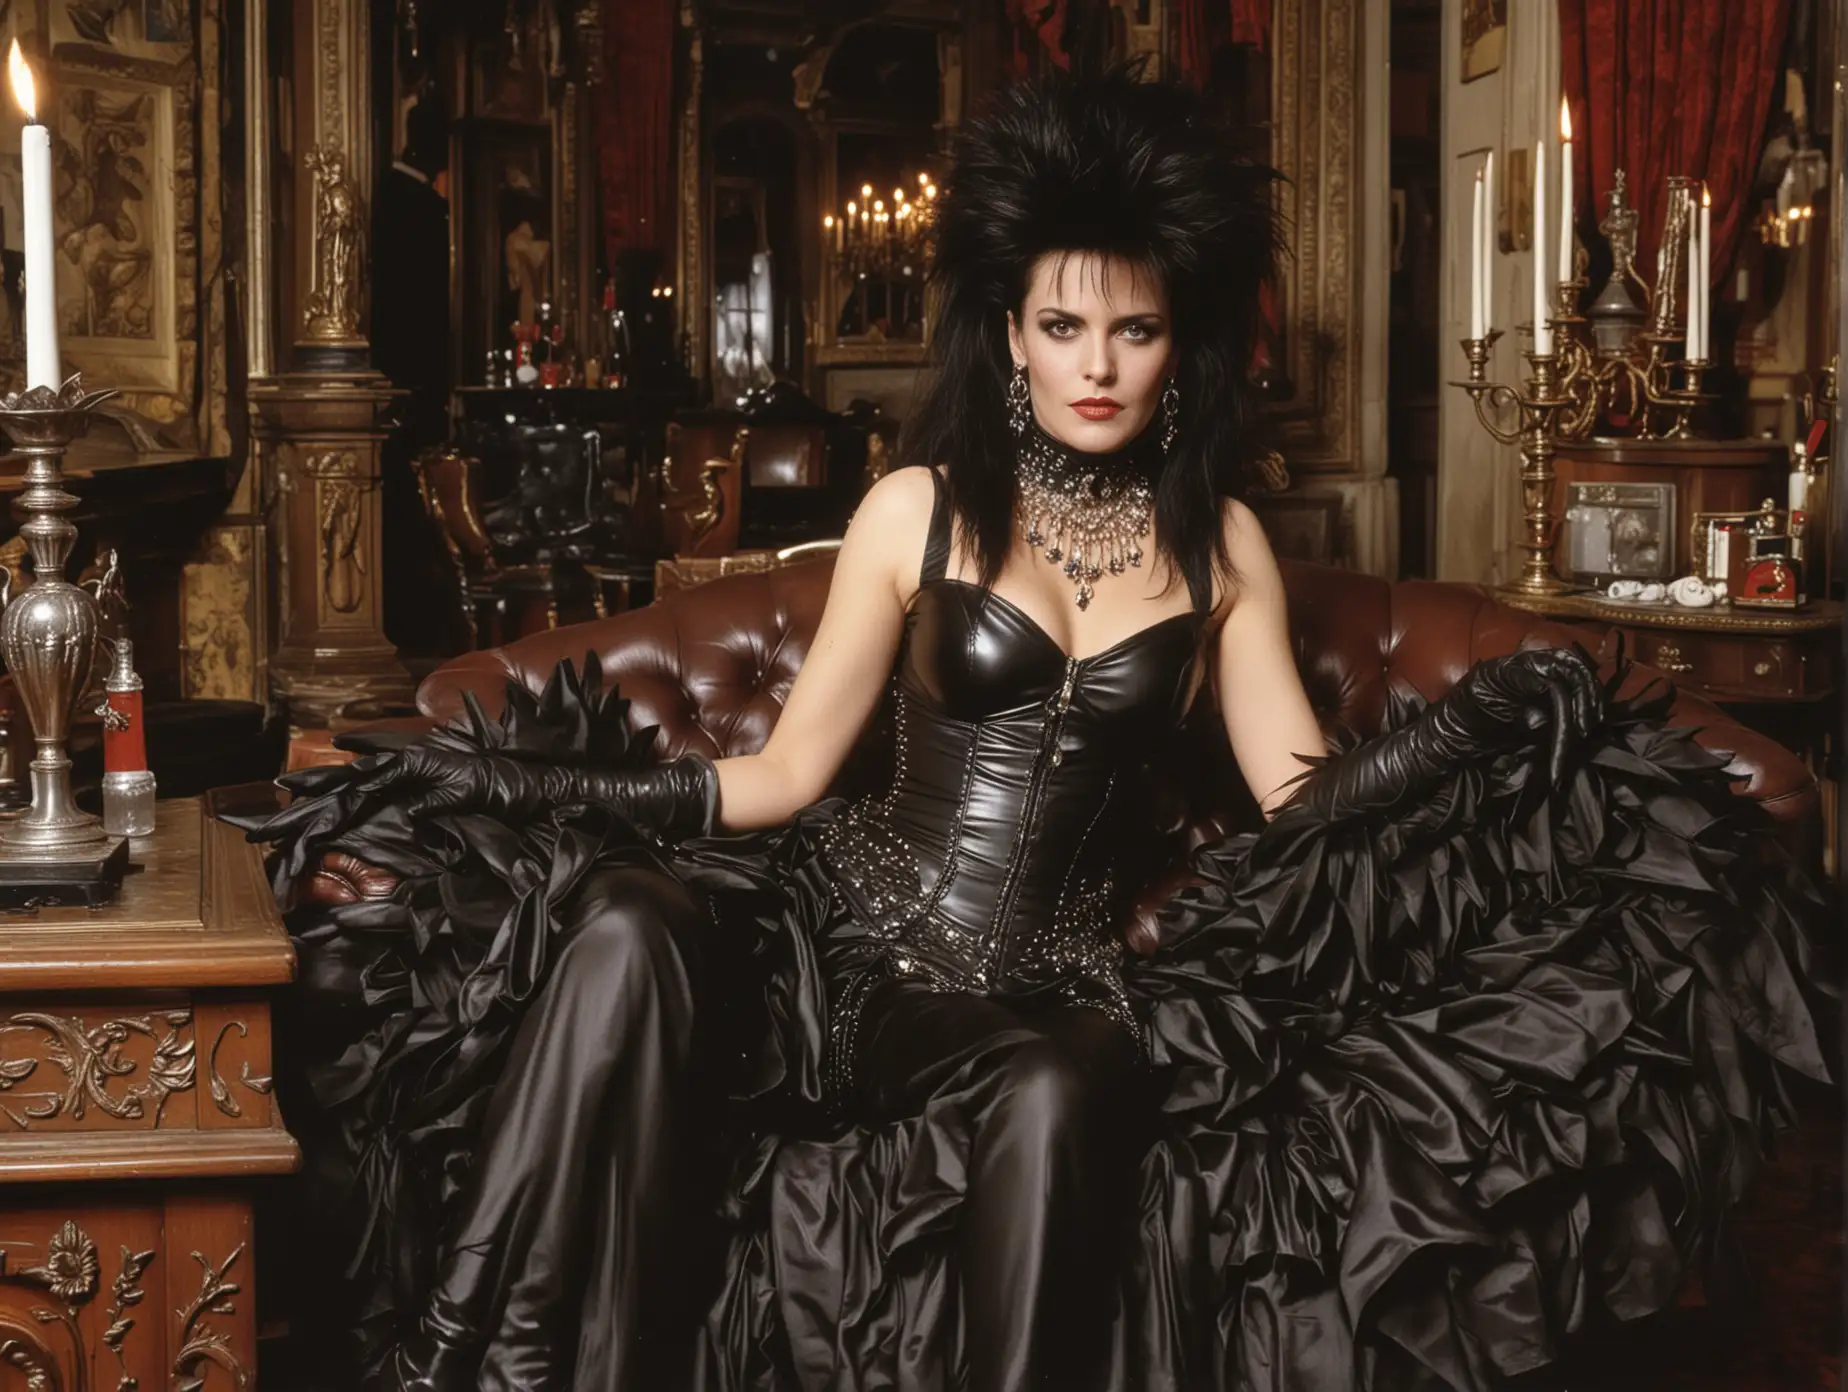 1980s-Patricia-Morrison-in-Gothic-Mansion-Lounge-with-Enormous-Spiky-Hair